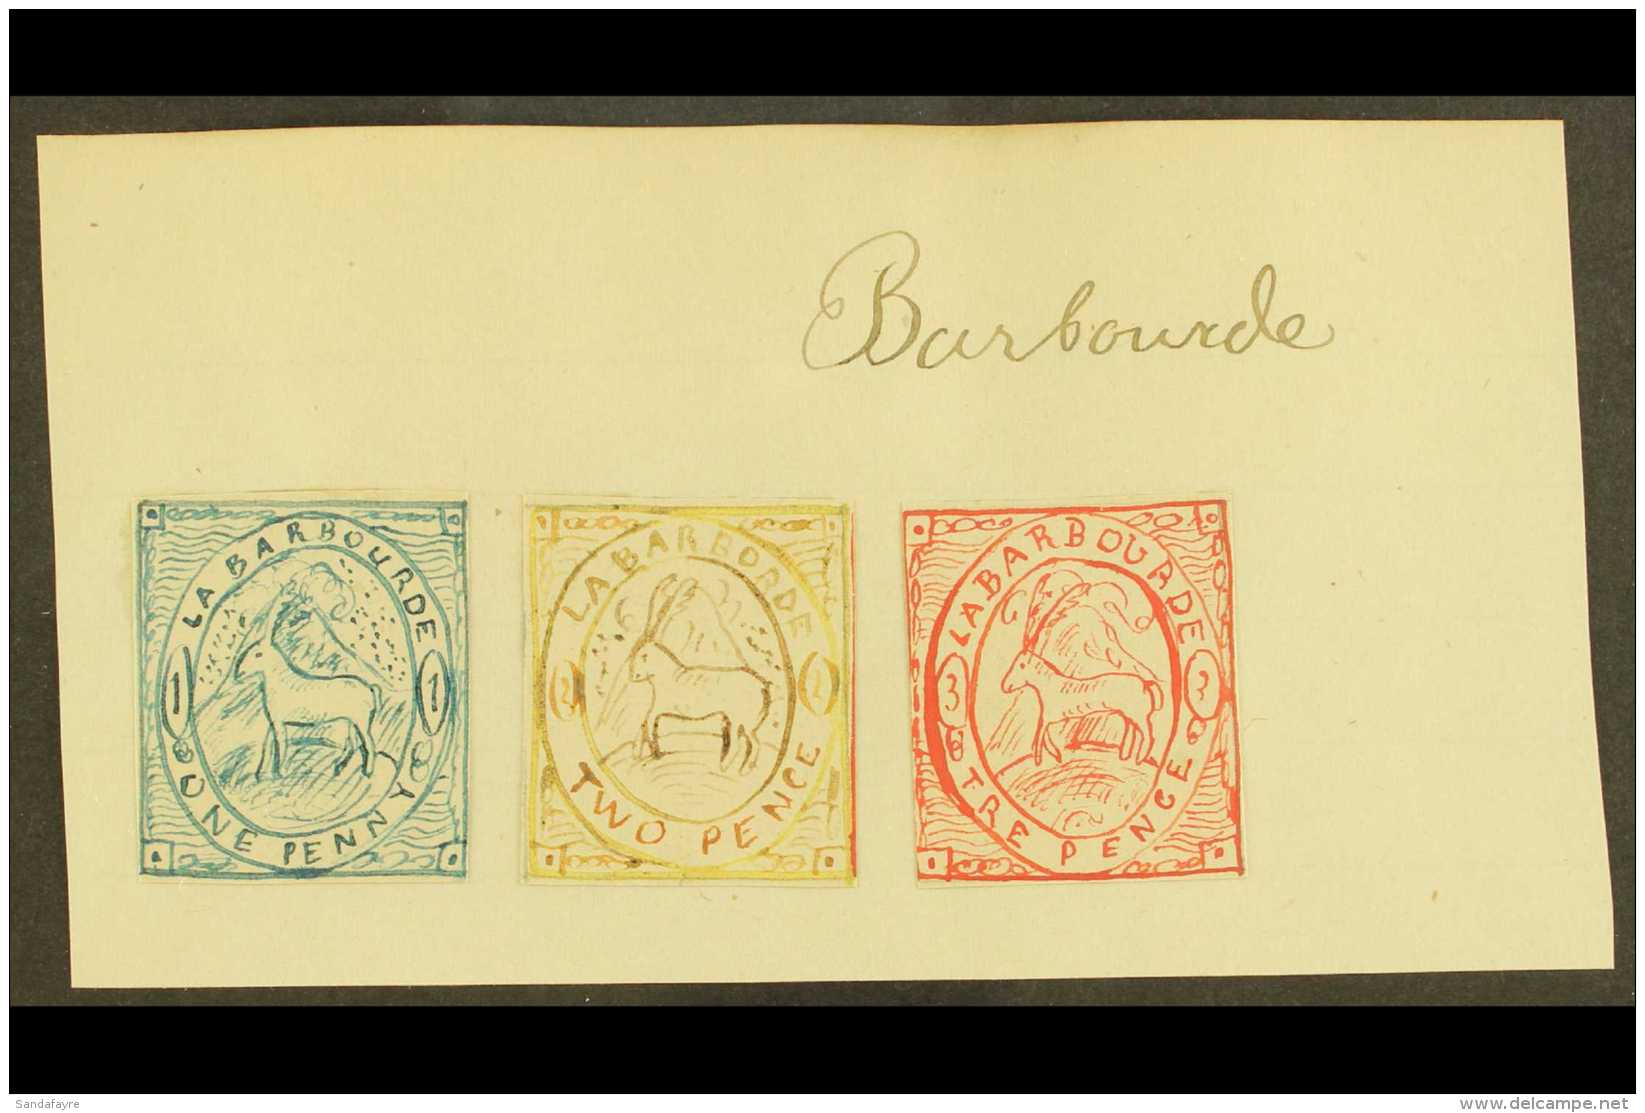 ANIMALS 1861 Hand Painted Stamp Sized Essays Created In France, Inscribed "La Barbourde" And Featuring An Antelope... - Zonder Classificatie